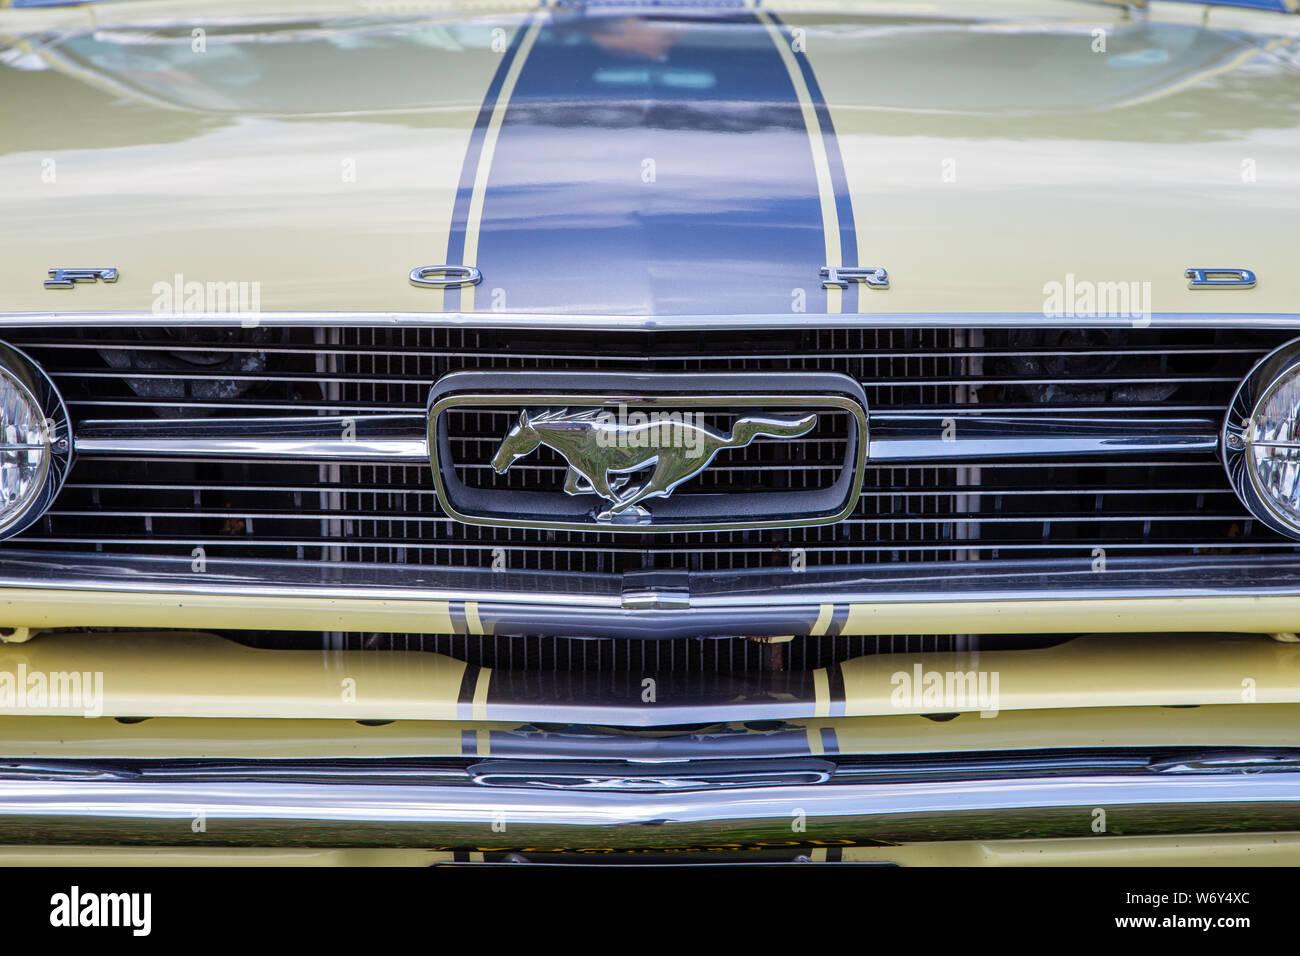 Vintage Ford Mustang car badge Stock Photo